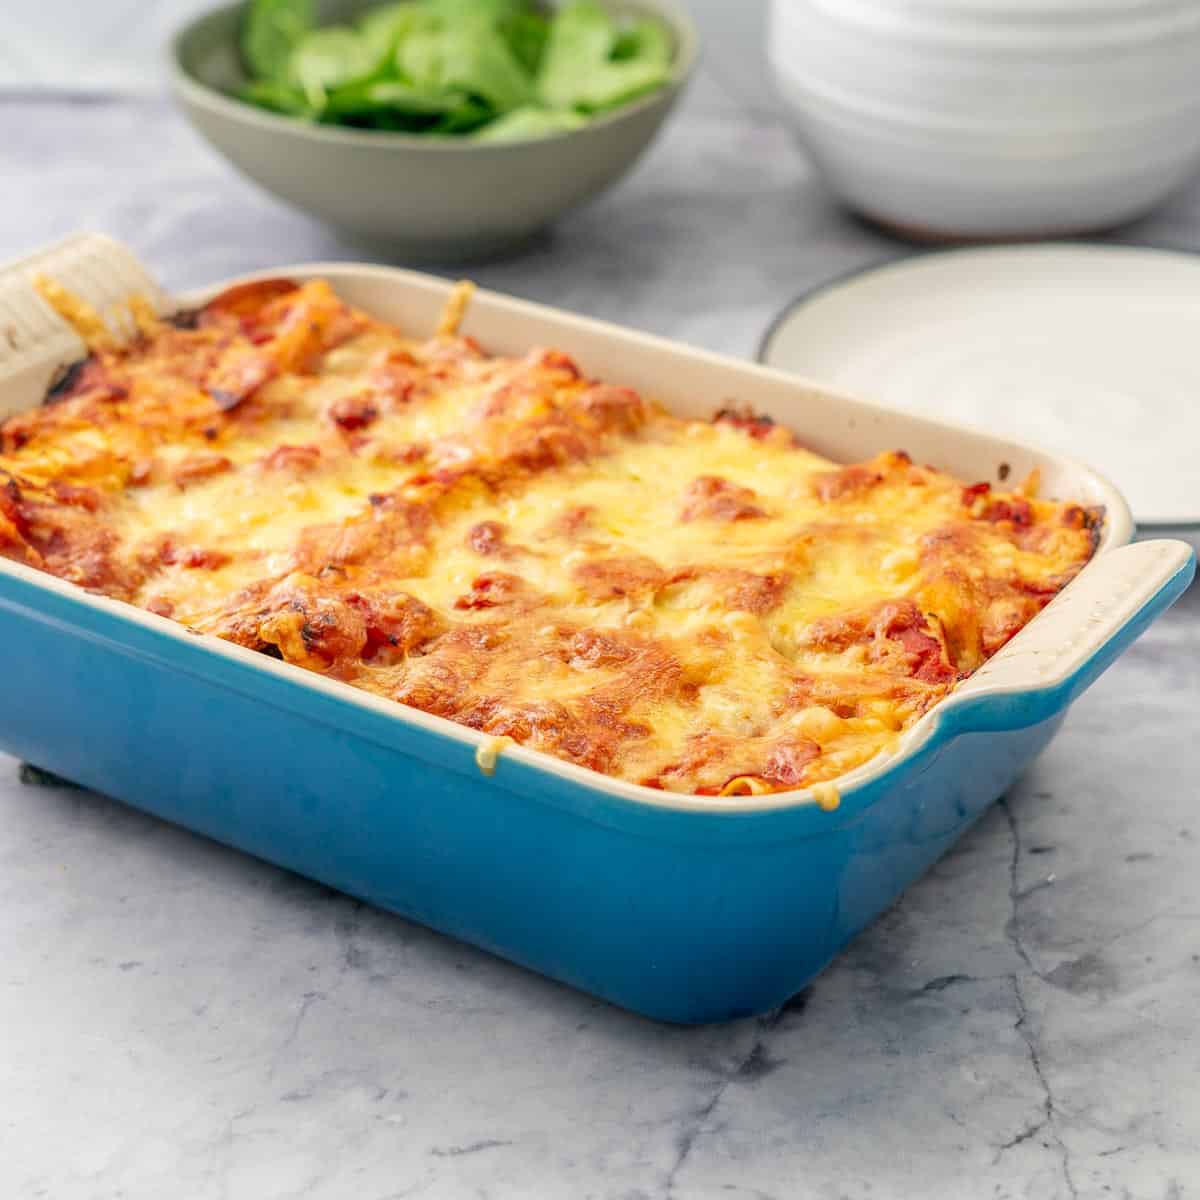 Baked Lasagna roll ups in a blue oven dish sitting on the bench with a green salad in the background 